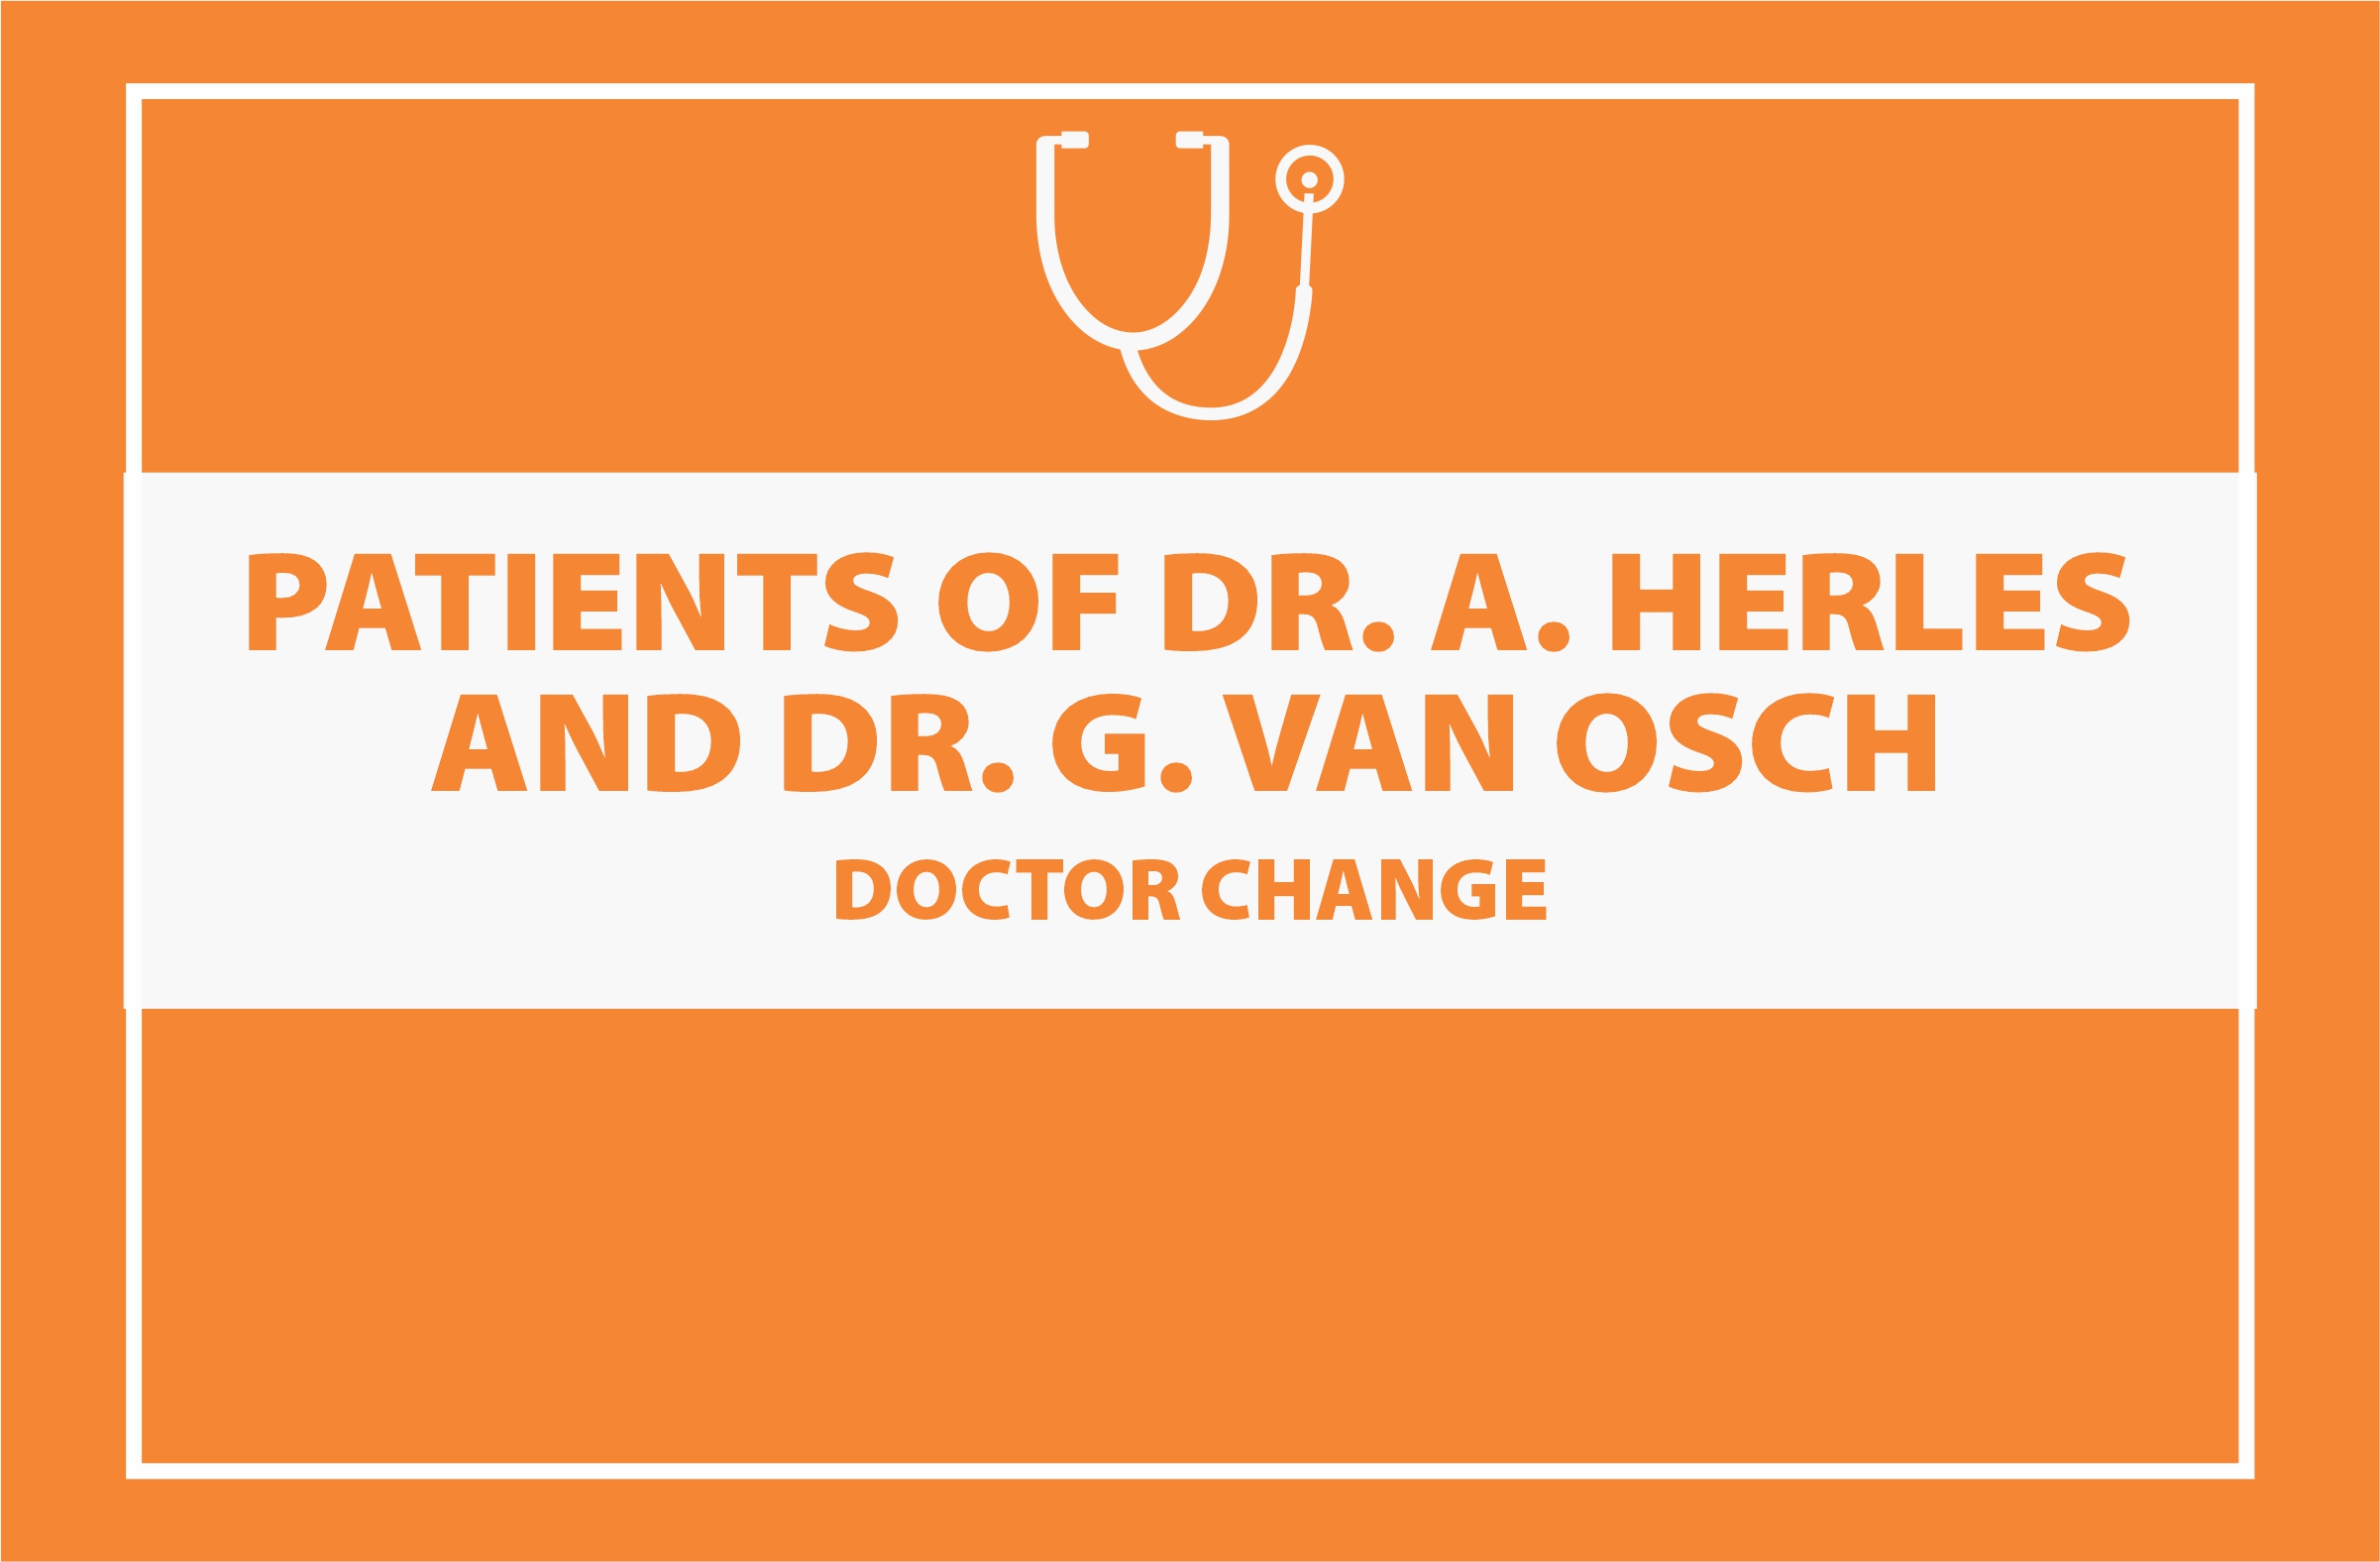 PATIENTS OF DR. A. HERLES AND DR. G. VAN OSCH